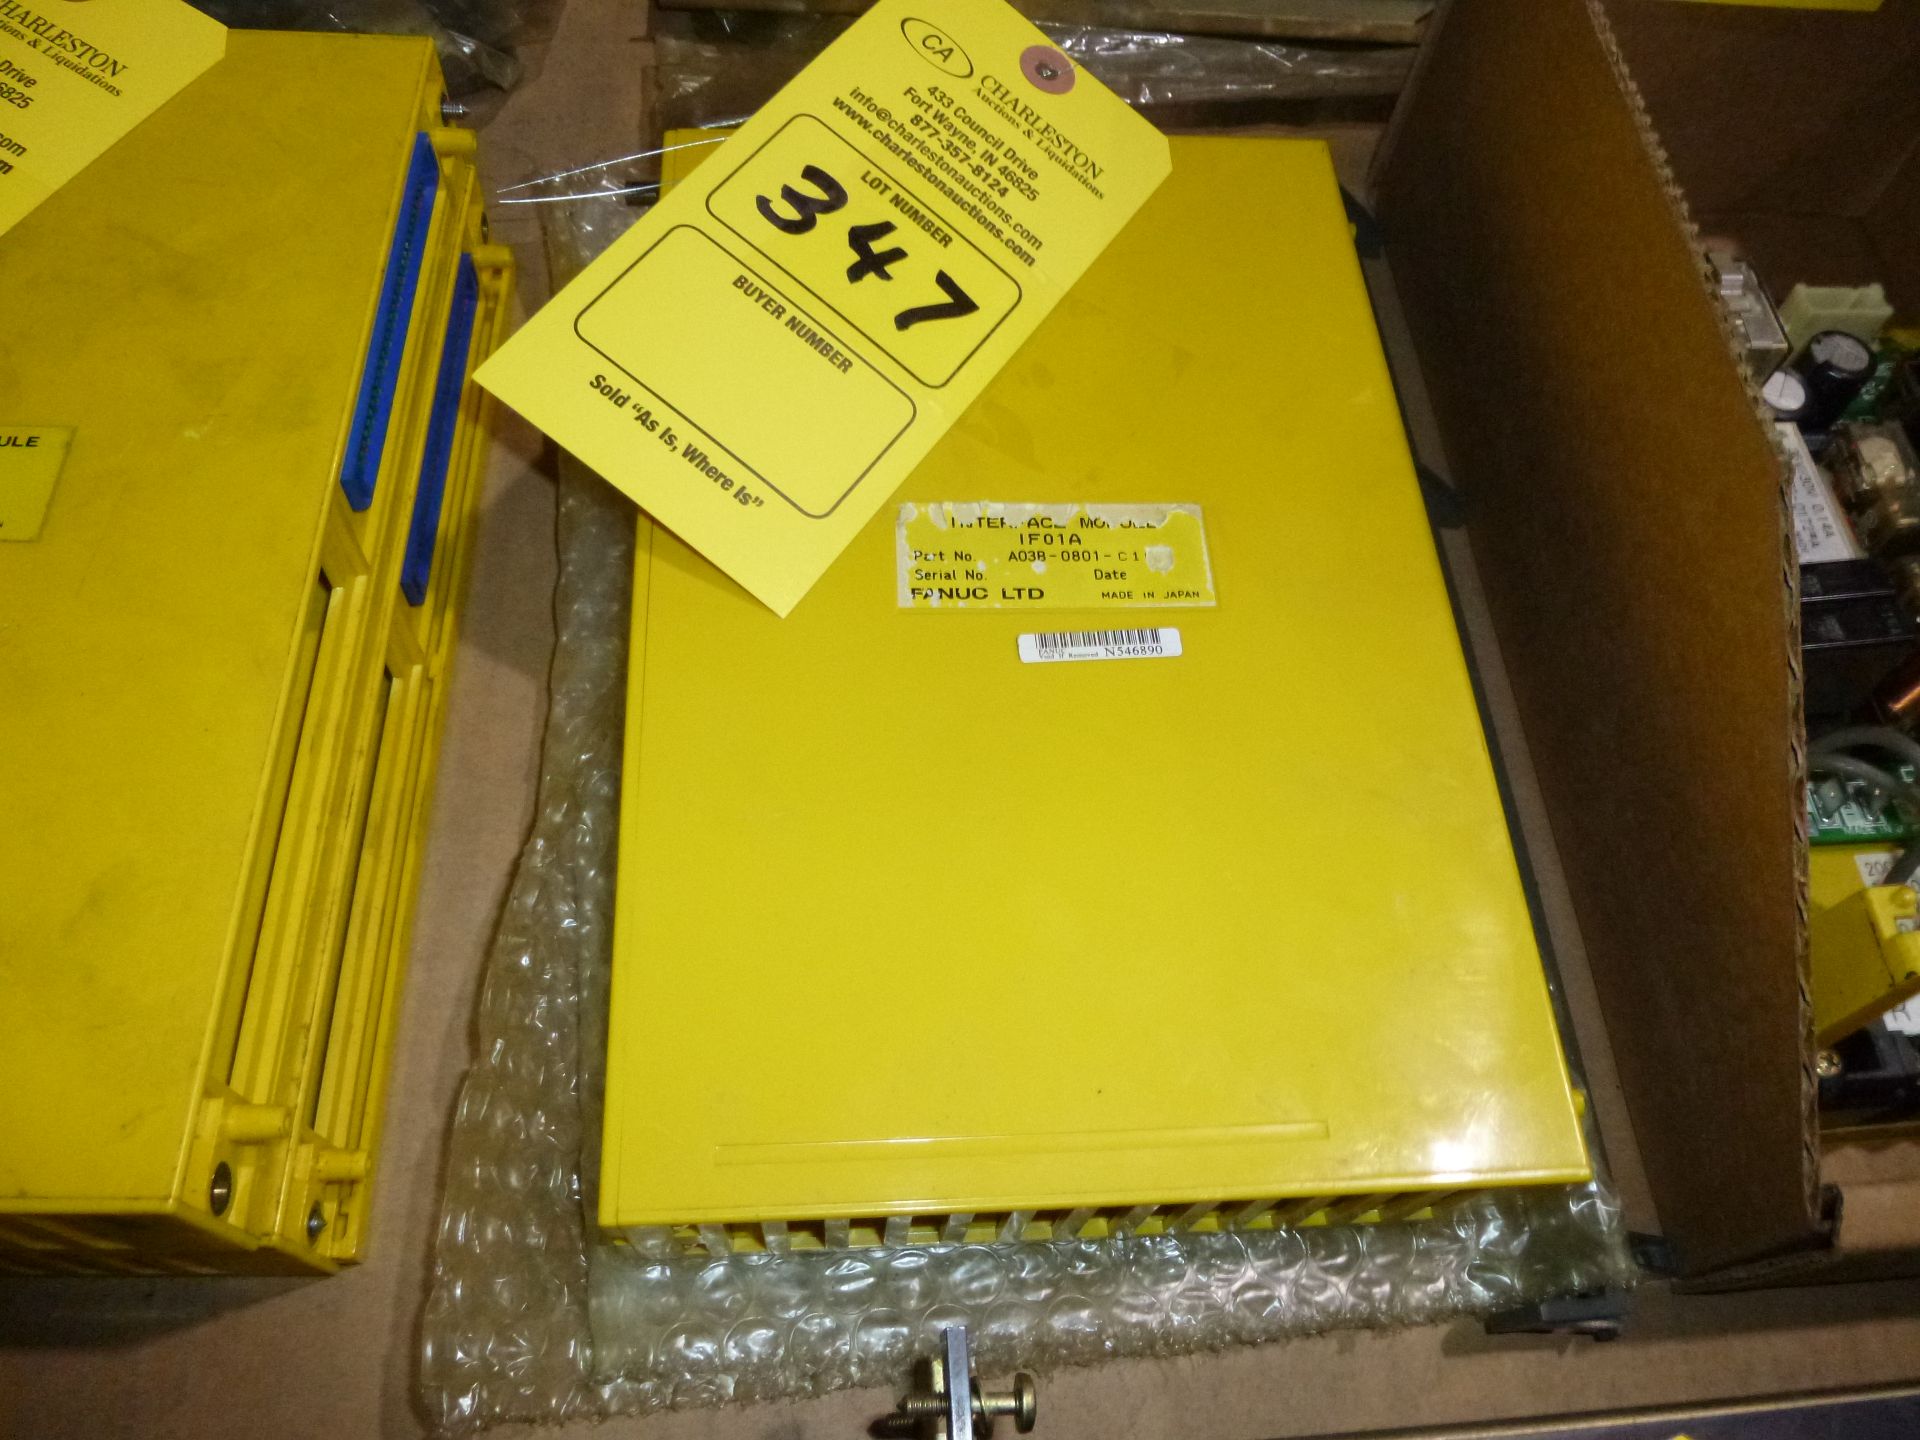 Fanuc model model IF01A, , as always with Brolyn LLC auctions, all lots can be picked up from